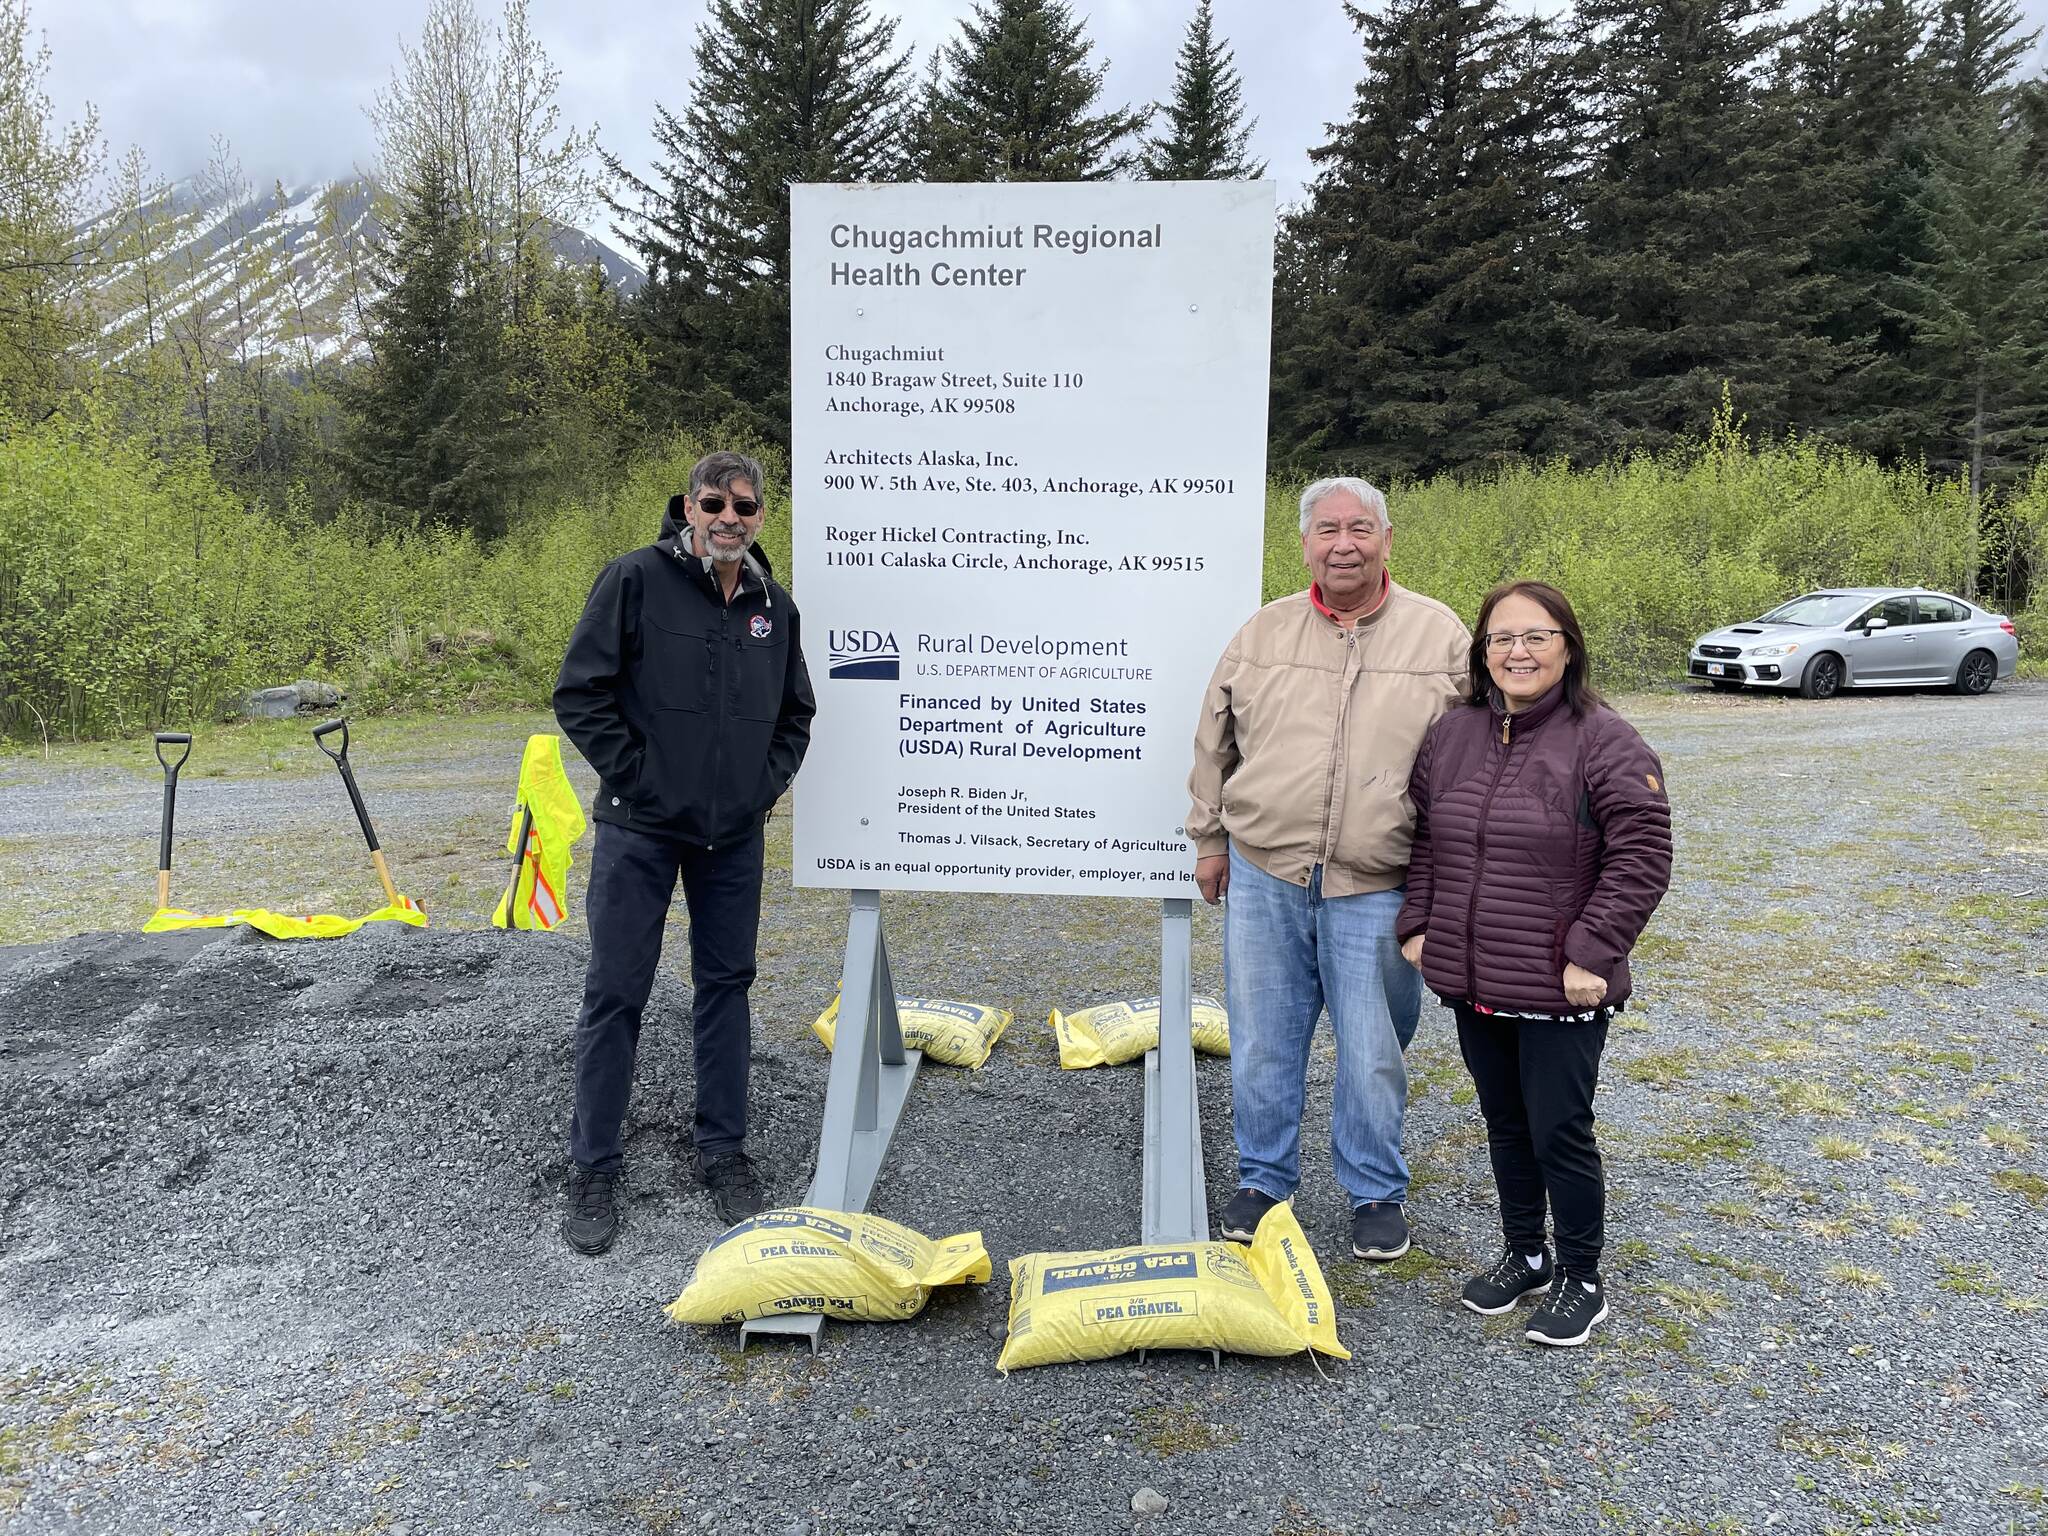 Chugachmiut Board Director Arne Hatch from Qutekcak, Vice Chair Larry Evanoff from Chenega, and Chair Fran Norman from Port Graham broke ground for the Chugachmiut Regional Health Center in Seward, Alaska, Saturday, June 3. The occasion marked the start of construction of the $20 million facility. The 15,475 square foot Tribally owned and operated health clinic will serve as a regional hub providing medical, dental, and behavioral health services for Alaskans in seven Tribal communities. (Photo provided by United States Department of Agriculture Rural Development)